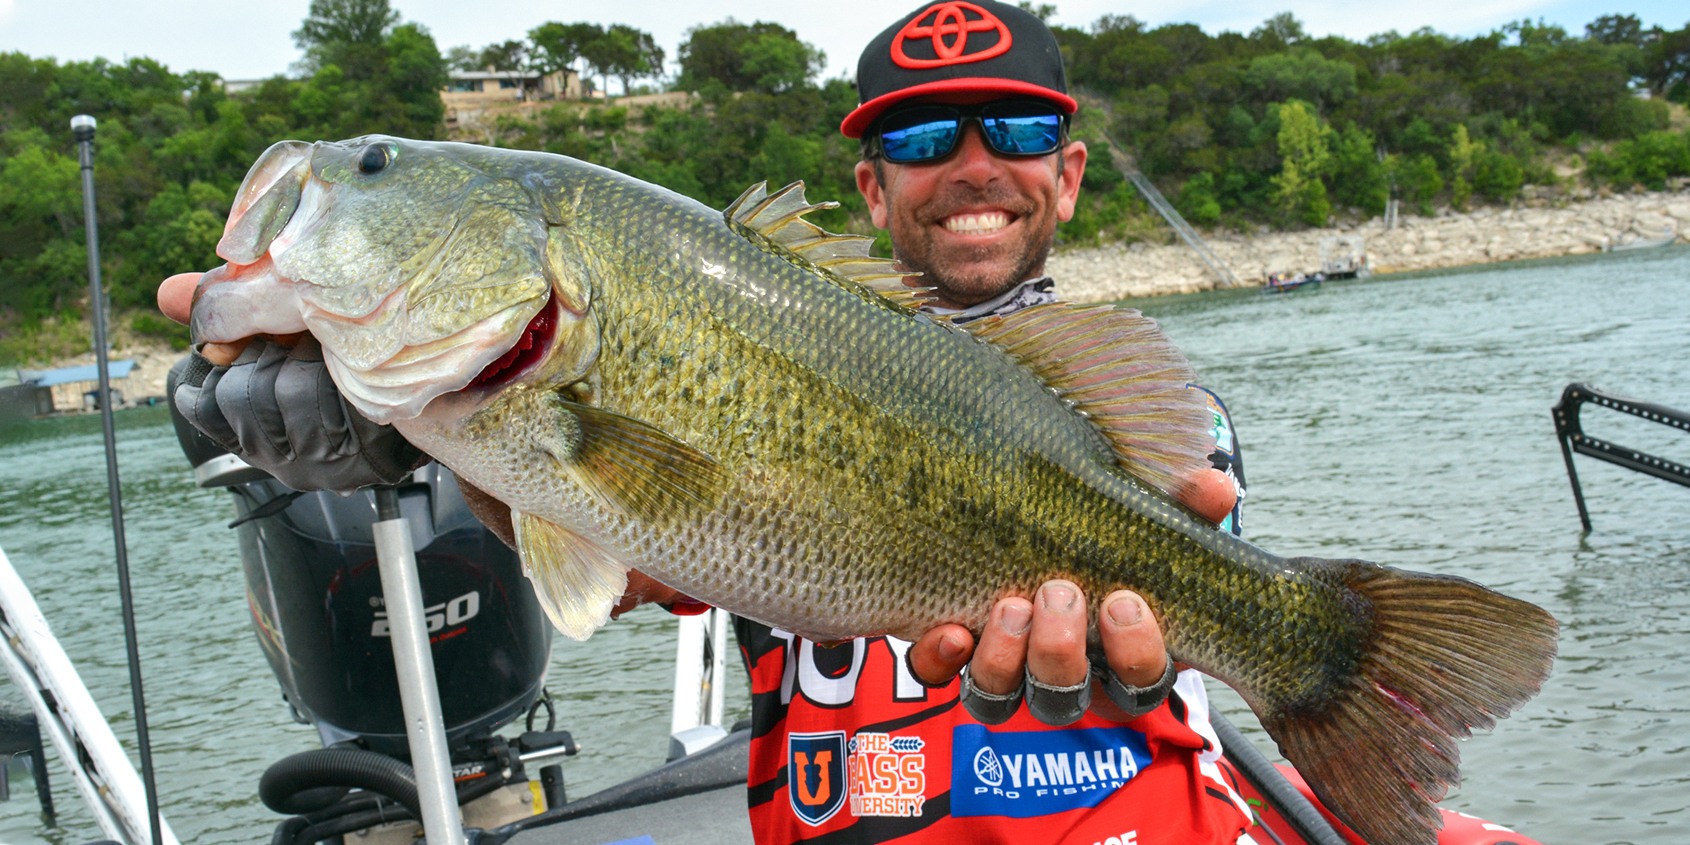 Mike “IKE” Iaconelli on X: I had a great few days down in Texas